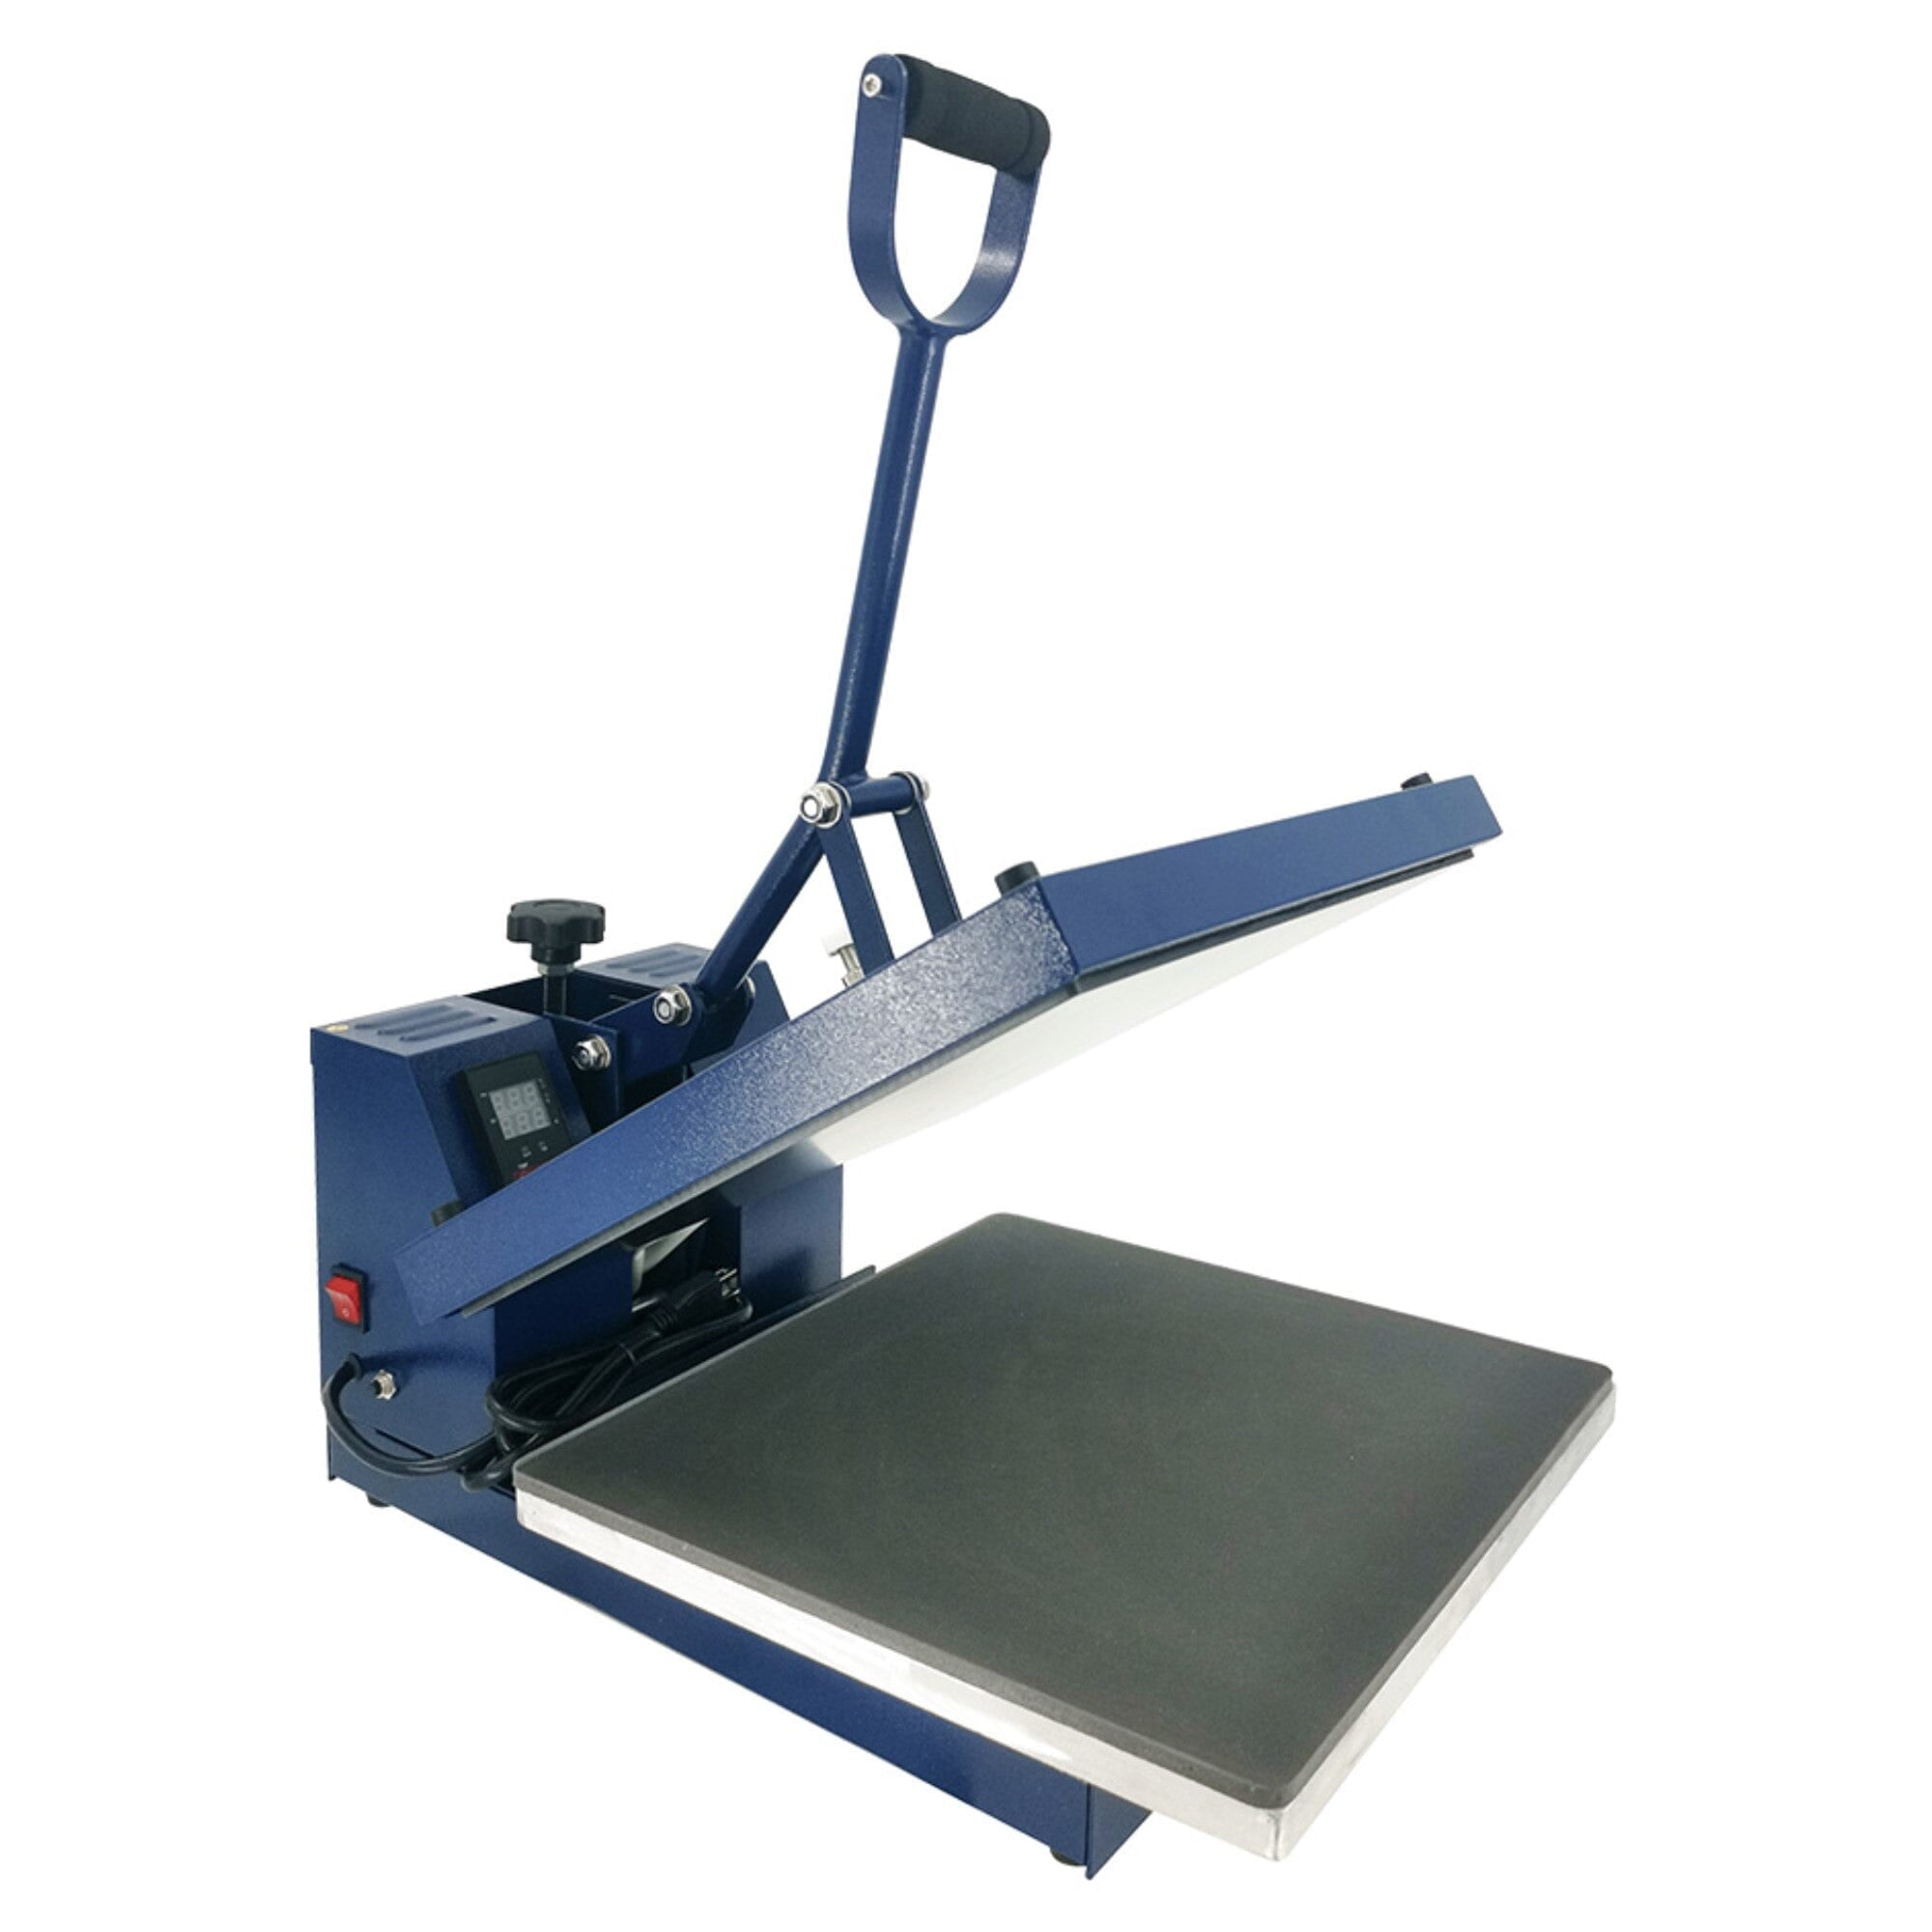 Swing Design 15 x 15 PRO Slide Out Heat Press - Turquoise